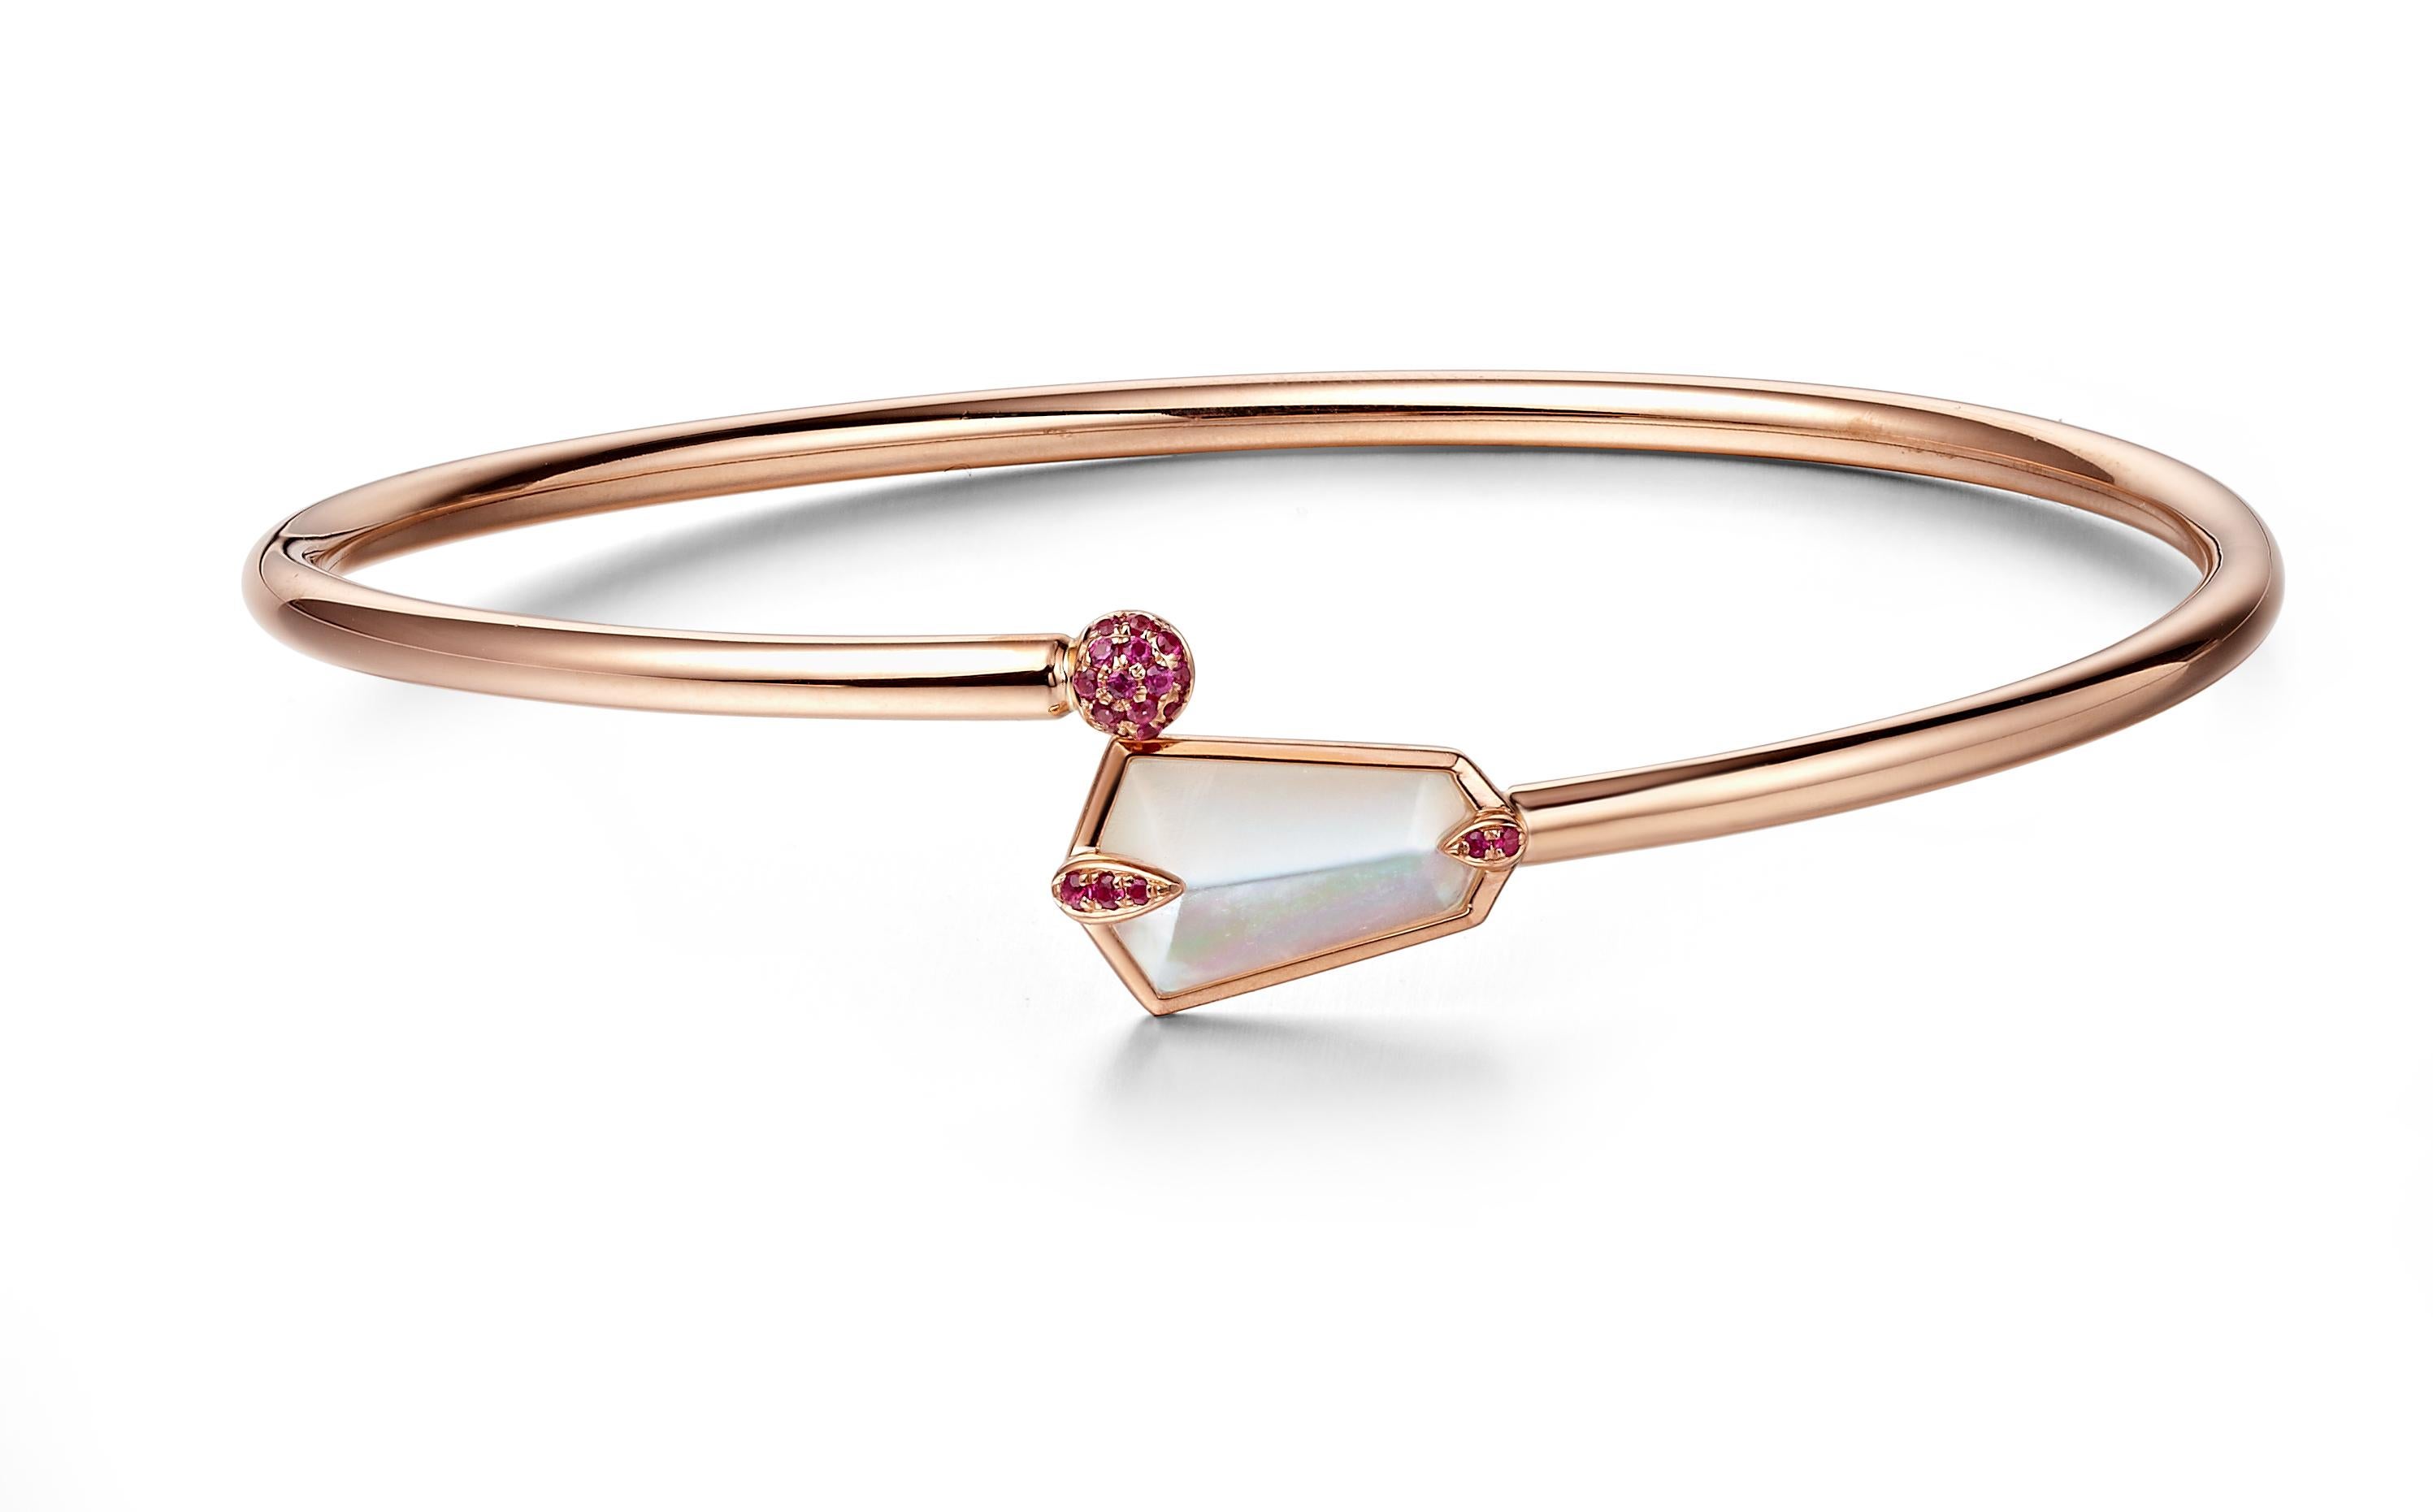 Description:
Nova kite bangle 0.083ct pink sapphires and 1ct mother of pearl, set in 18ct rose gold with a high polish.

Inspiration
The Nova Collection embodies the essence of freedom and having the courage to explore new adventures – much like the